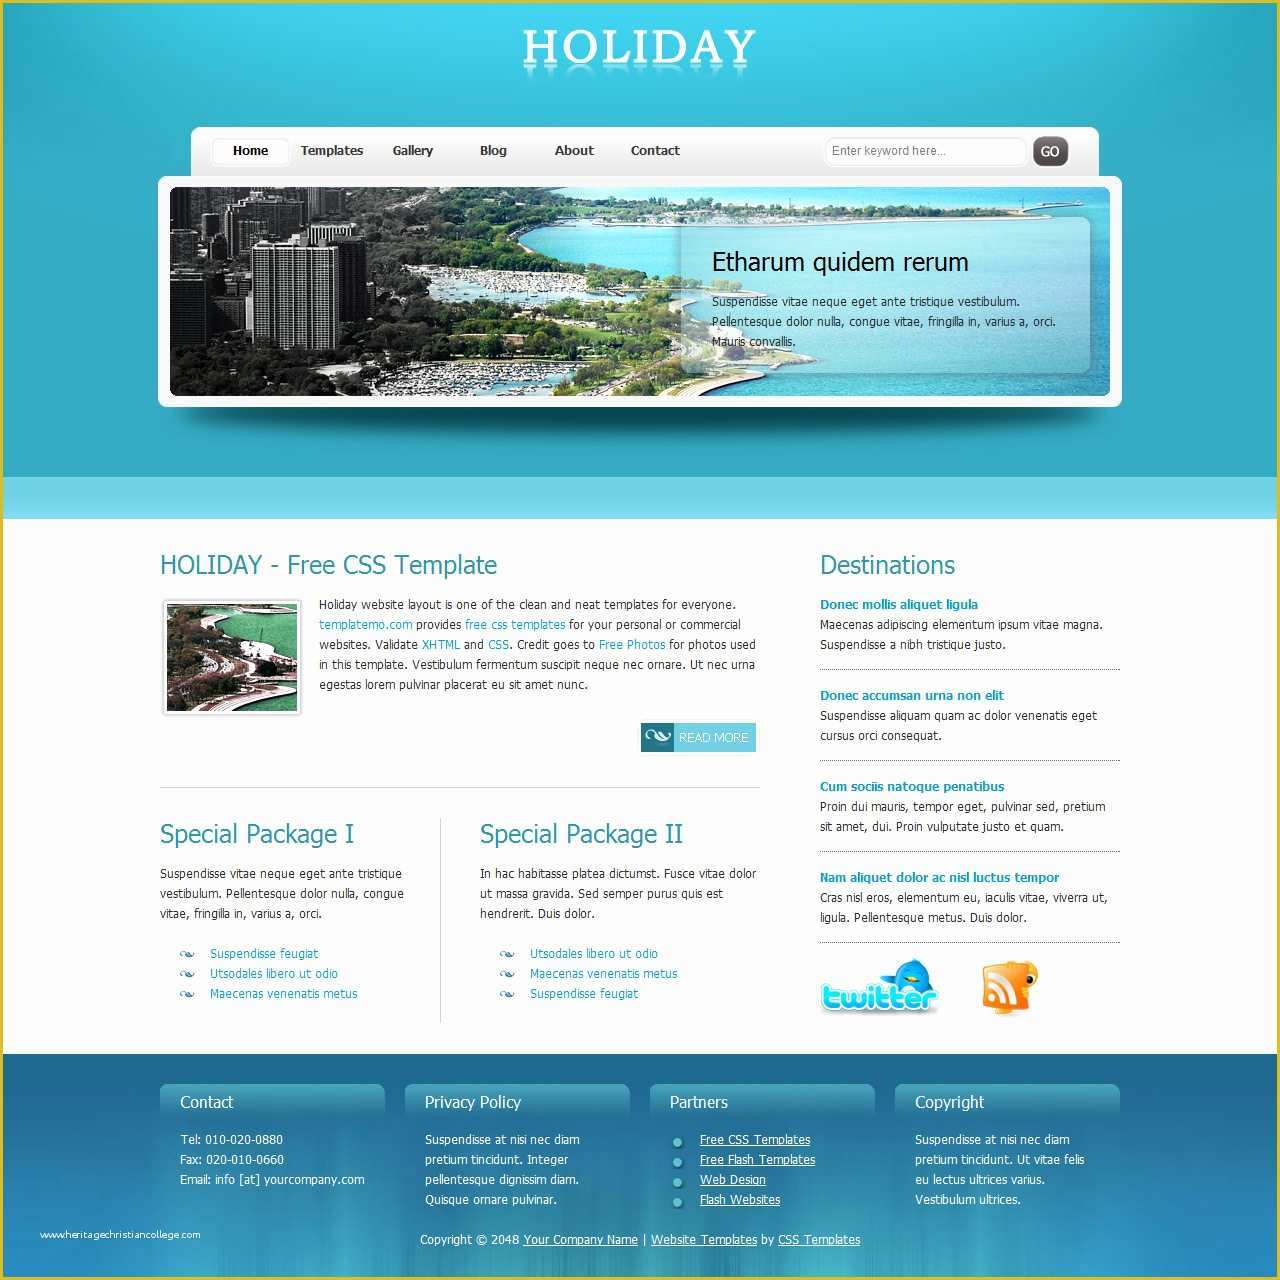 Holiday Website Templates Free Of 20 Free & Premium HTML Travel Website Templates